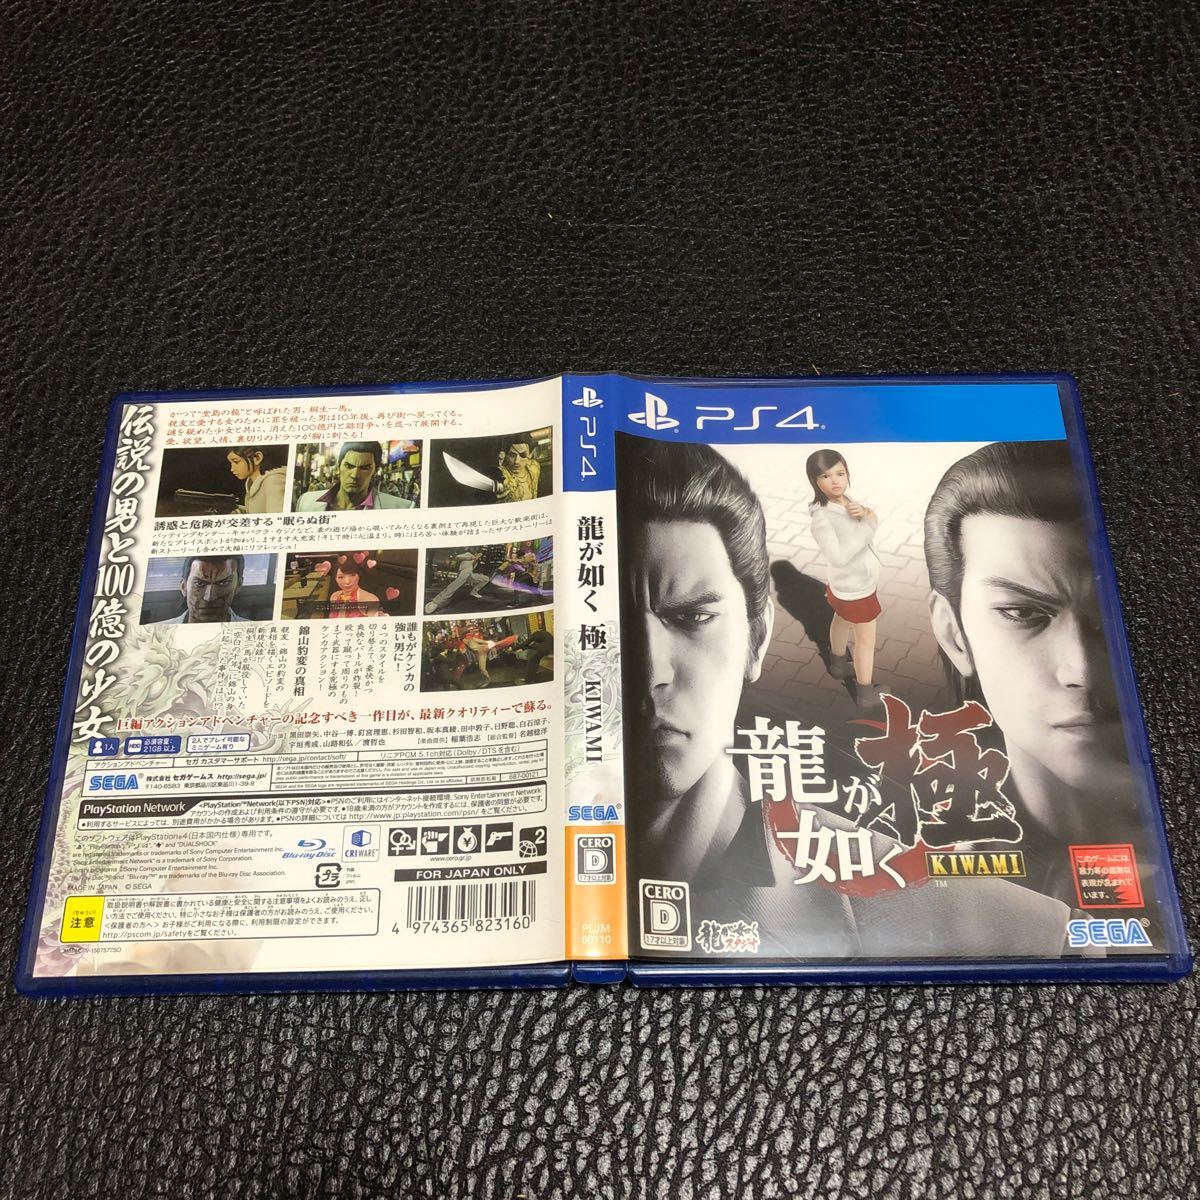 【PS4】 龍が如く0 龍が如く極　龍が如く極2 3本セット　龍が如く